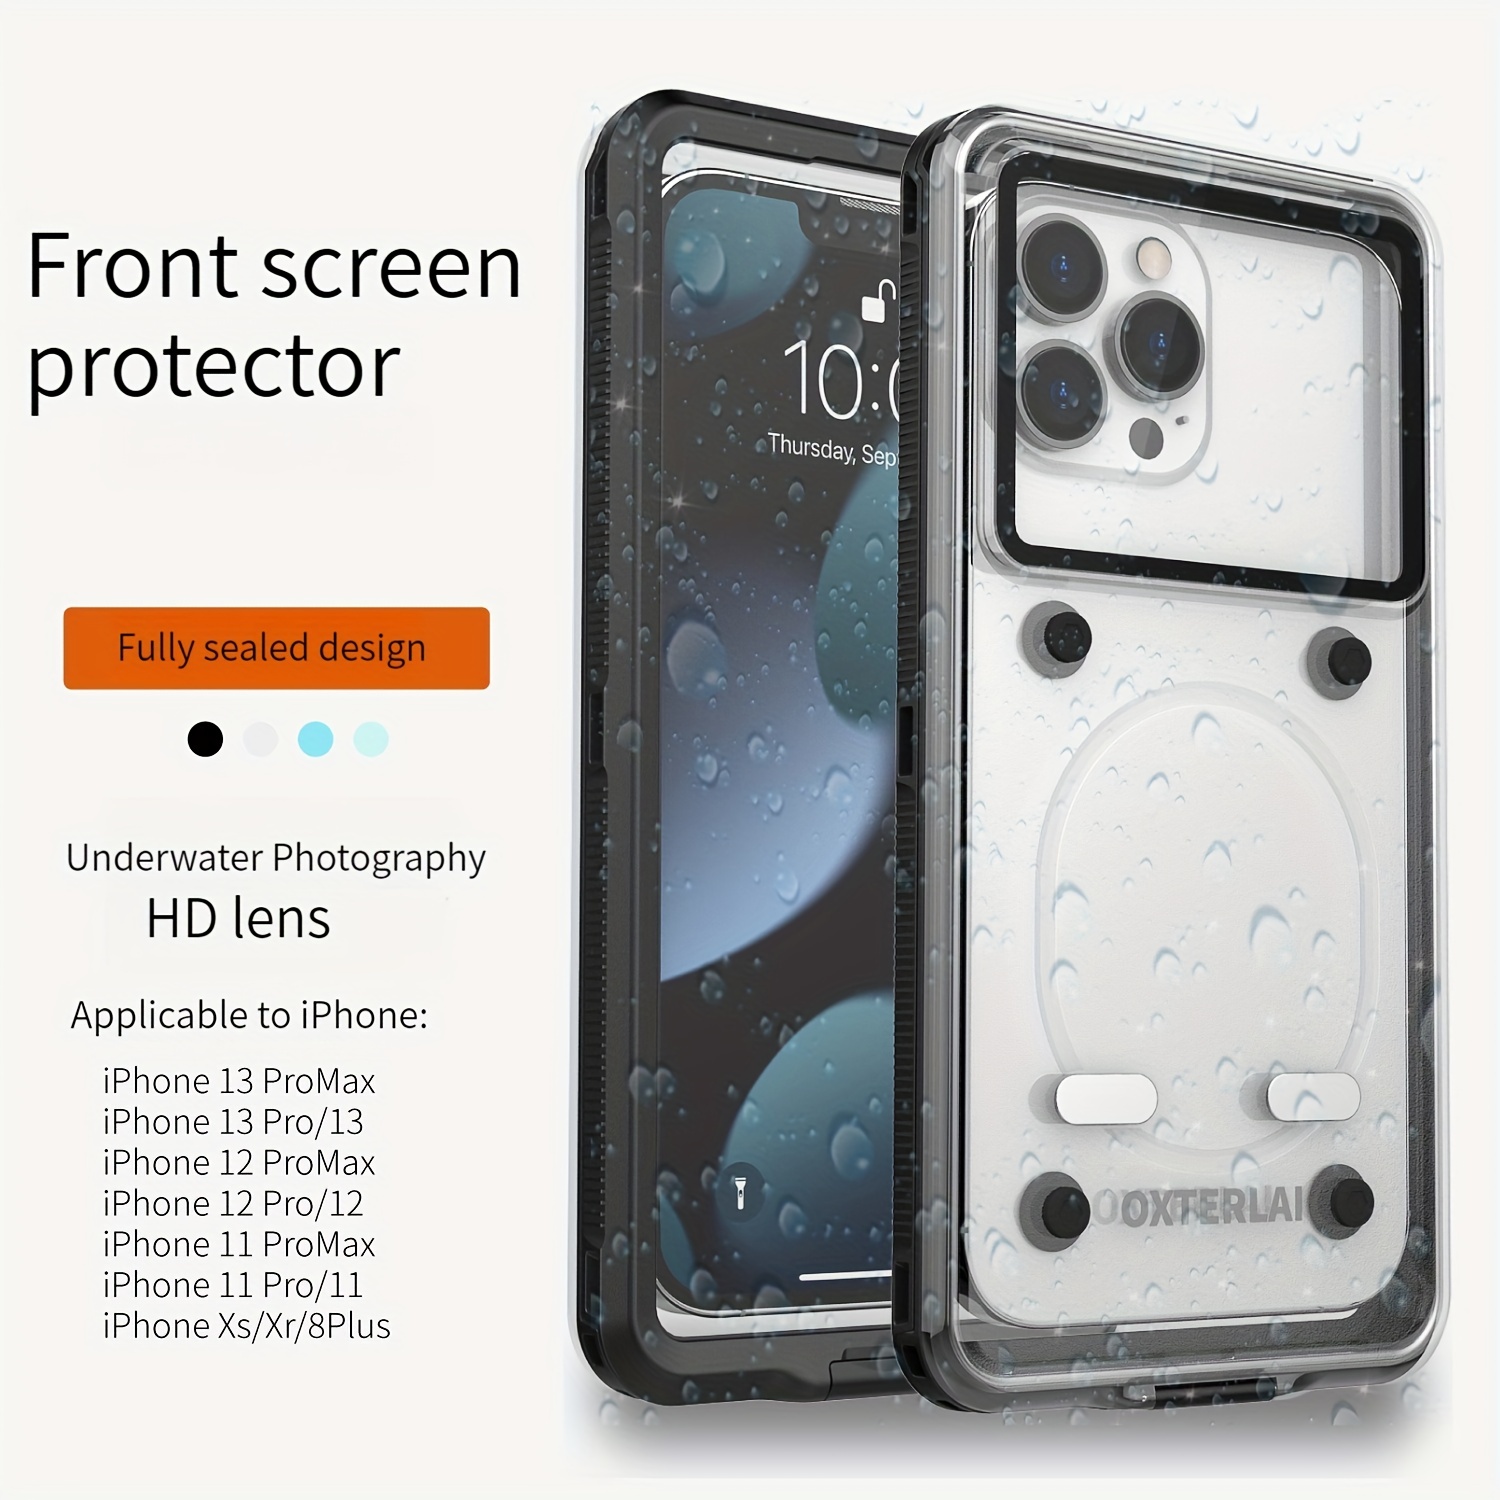 Hiearcool - Funda impermeable IPX8, universal y compatible con celular  iPhone 12, Pro 11, Pro Max, XS, Max, XR, X, 8, 7, Samsung Galaxy S10, S9